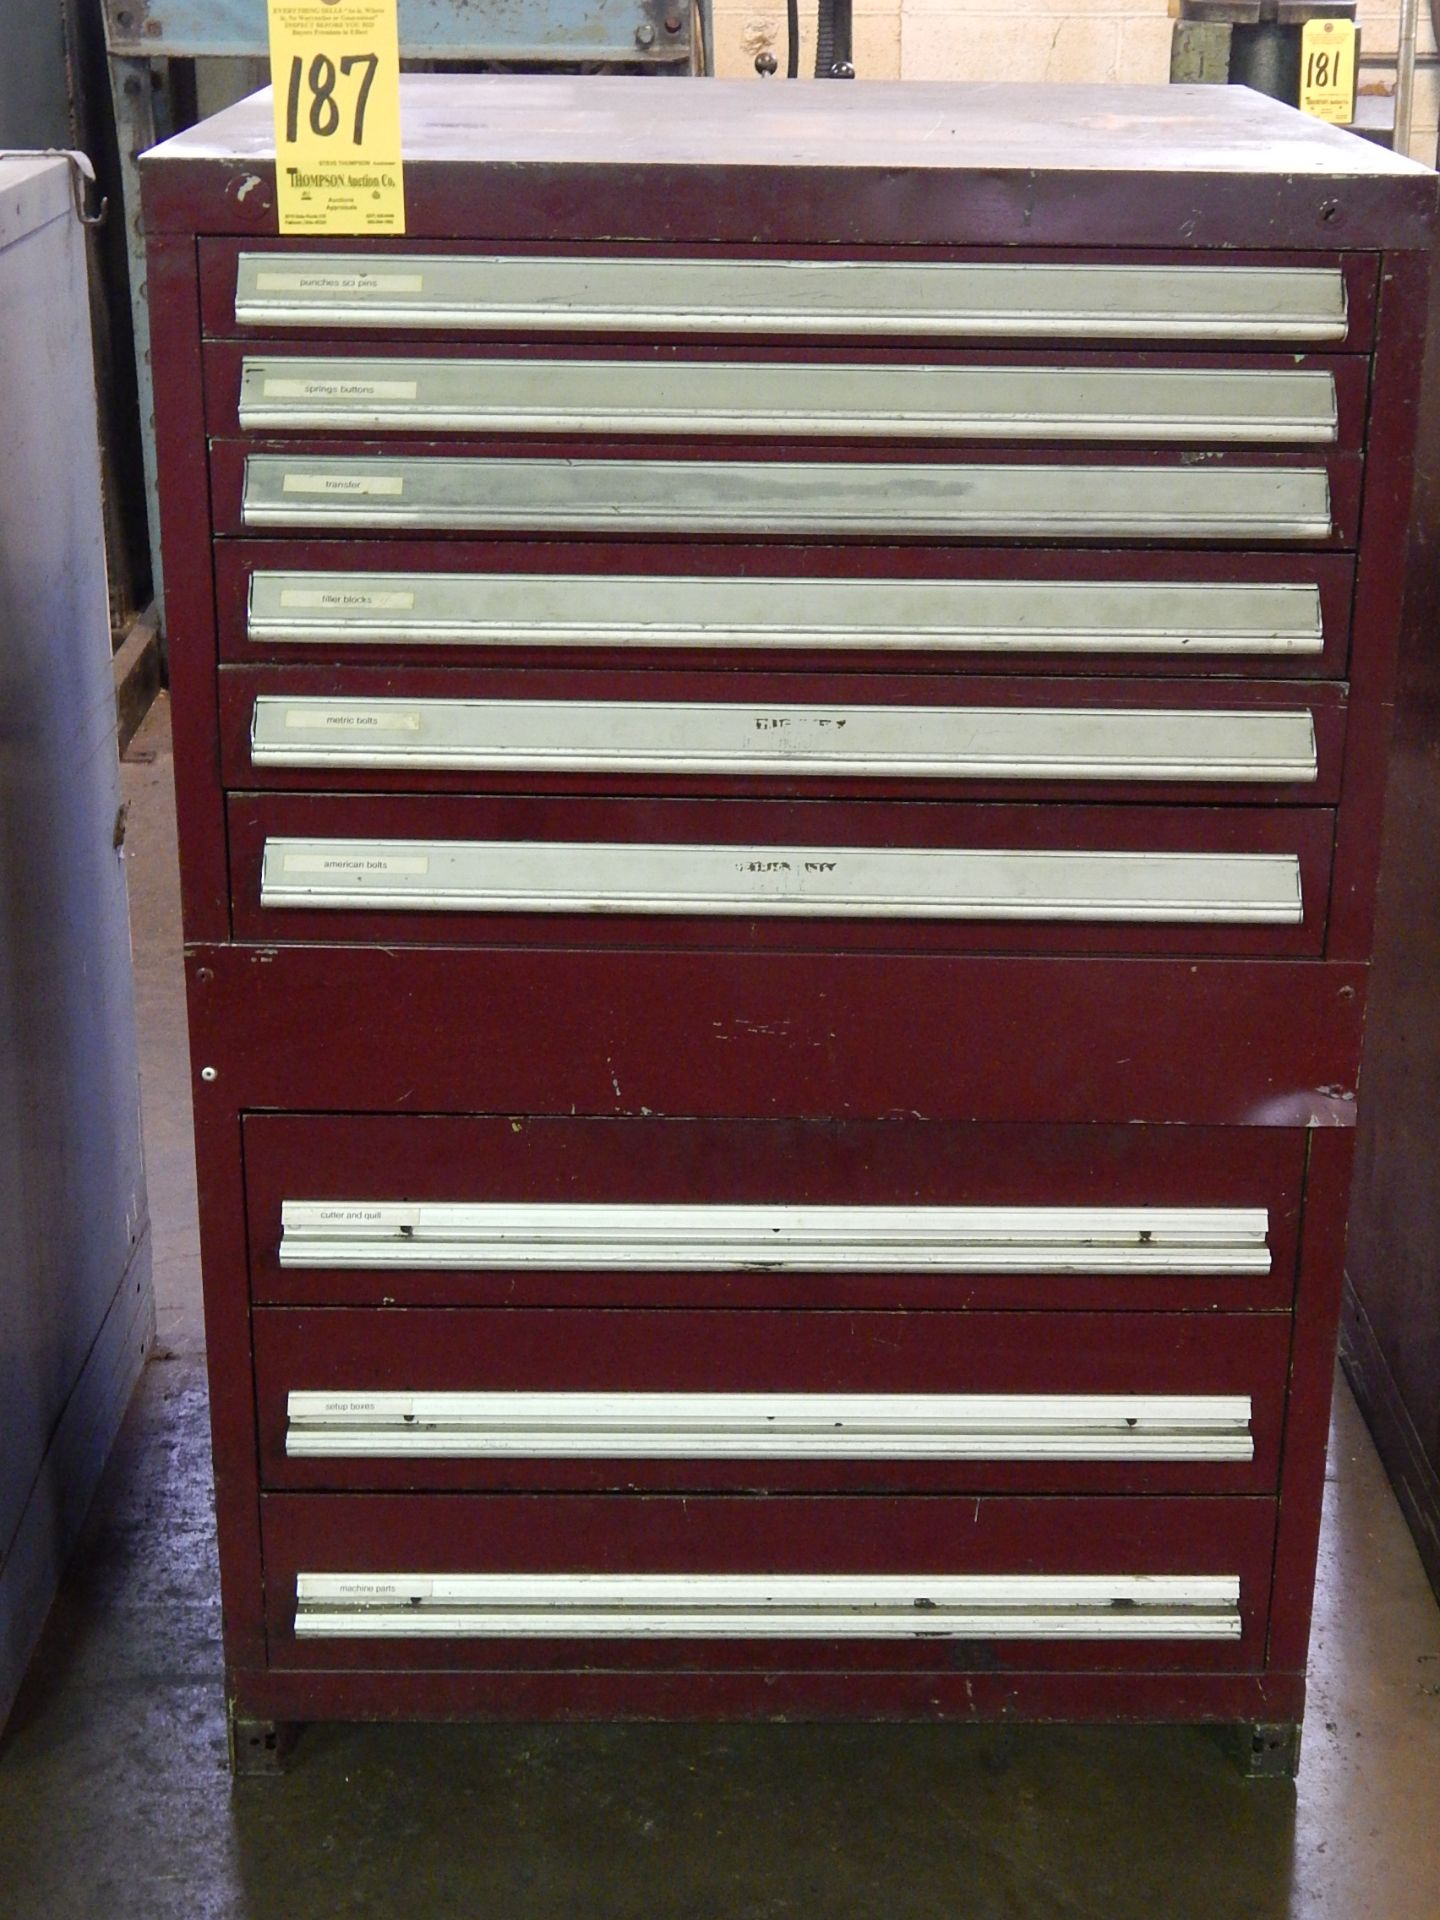 9 Drawer Tooling Cabinet, 44 1/2 In. Tall, 30 In. Wide, 27 3/4 In. Deep, Loading Fee $50.00